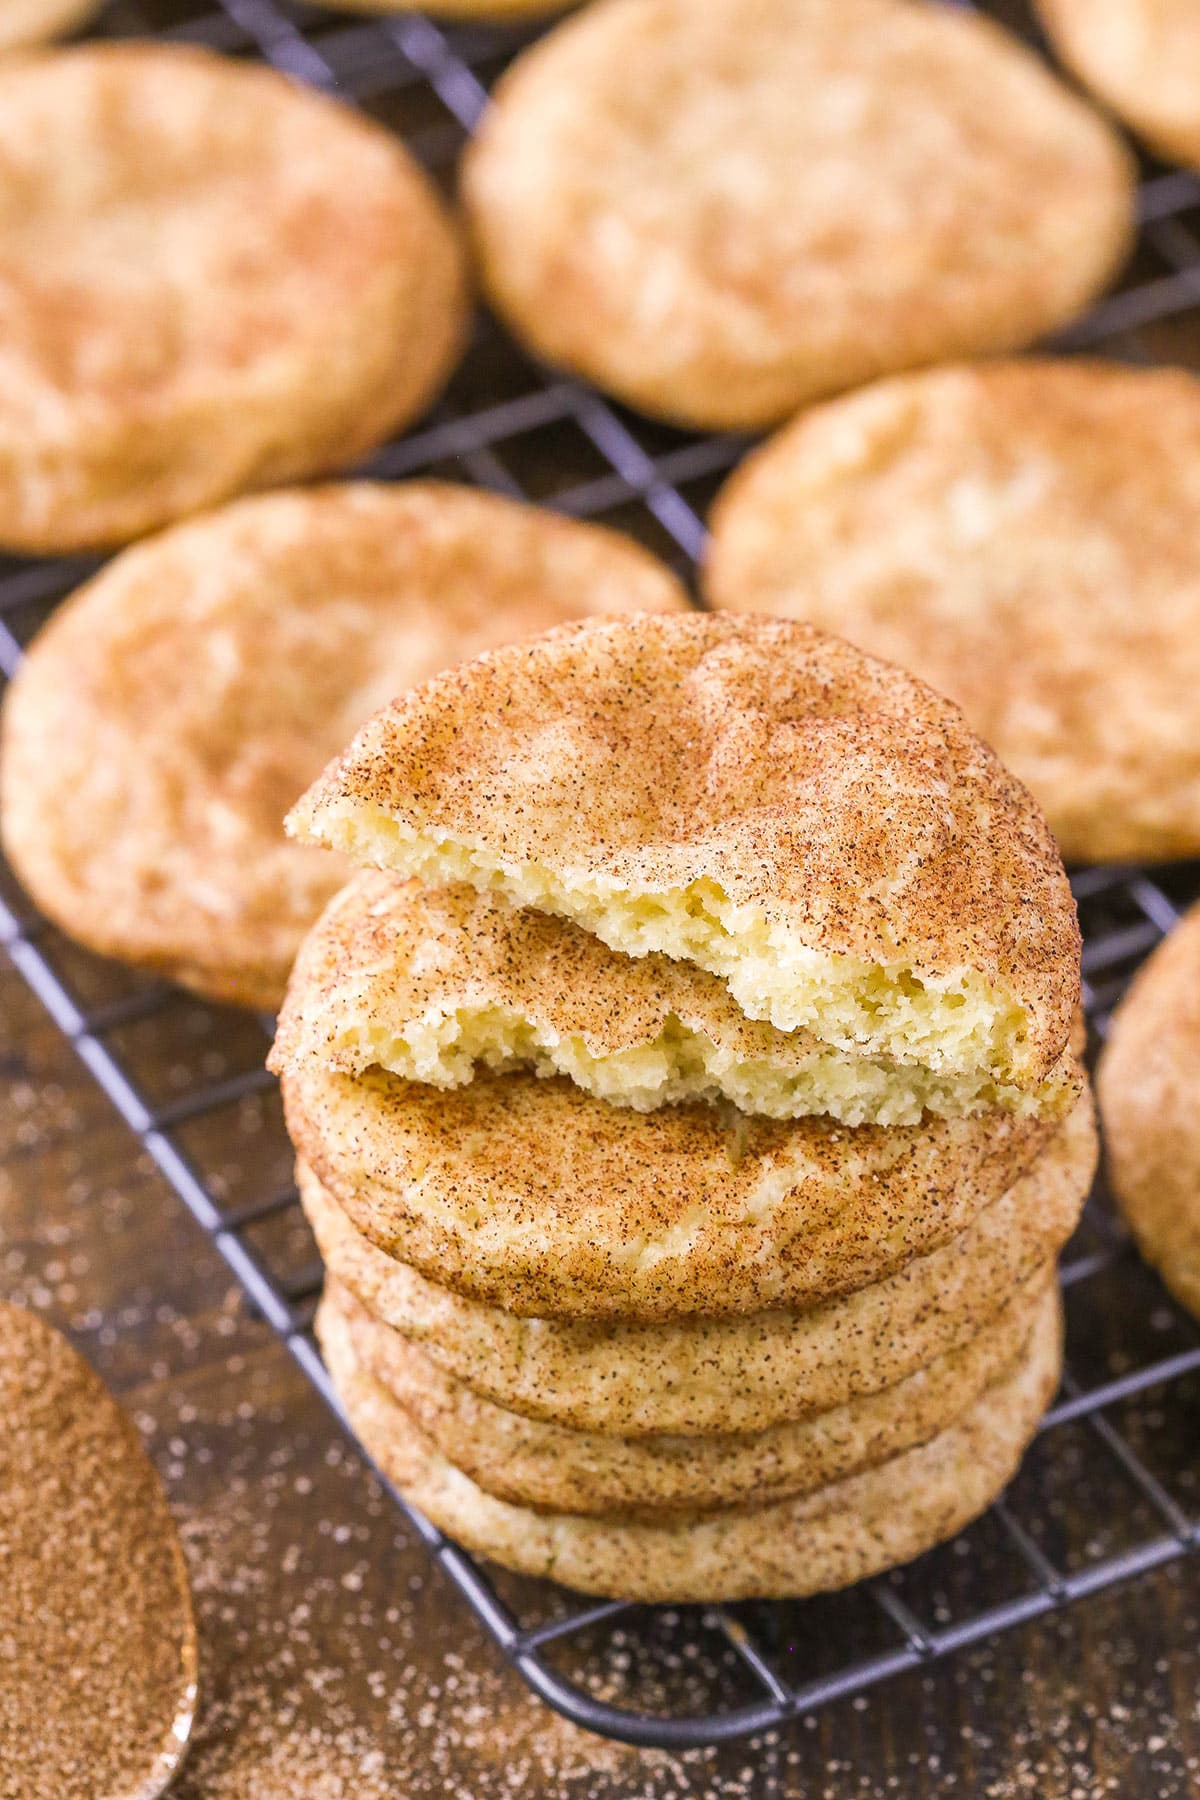 A stack of snickerdoodles on a wire rack. The top cookie has a bite taken out of it.